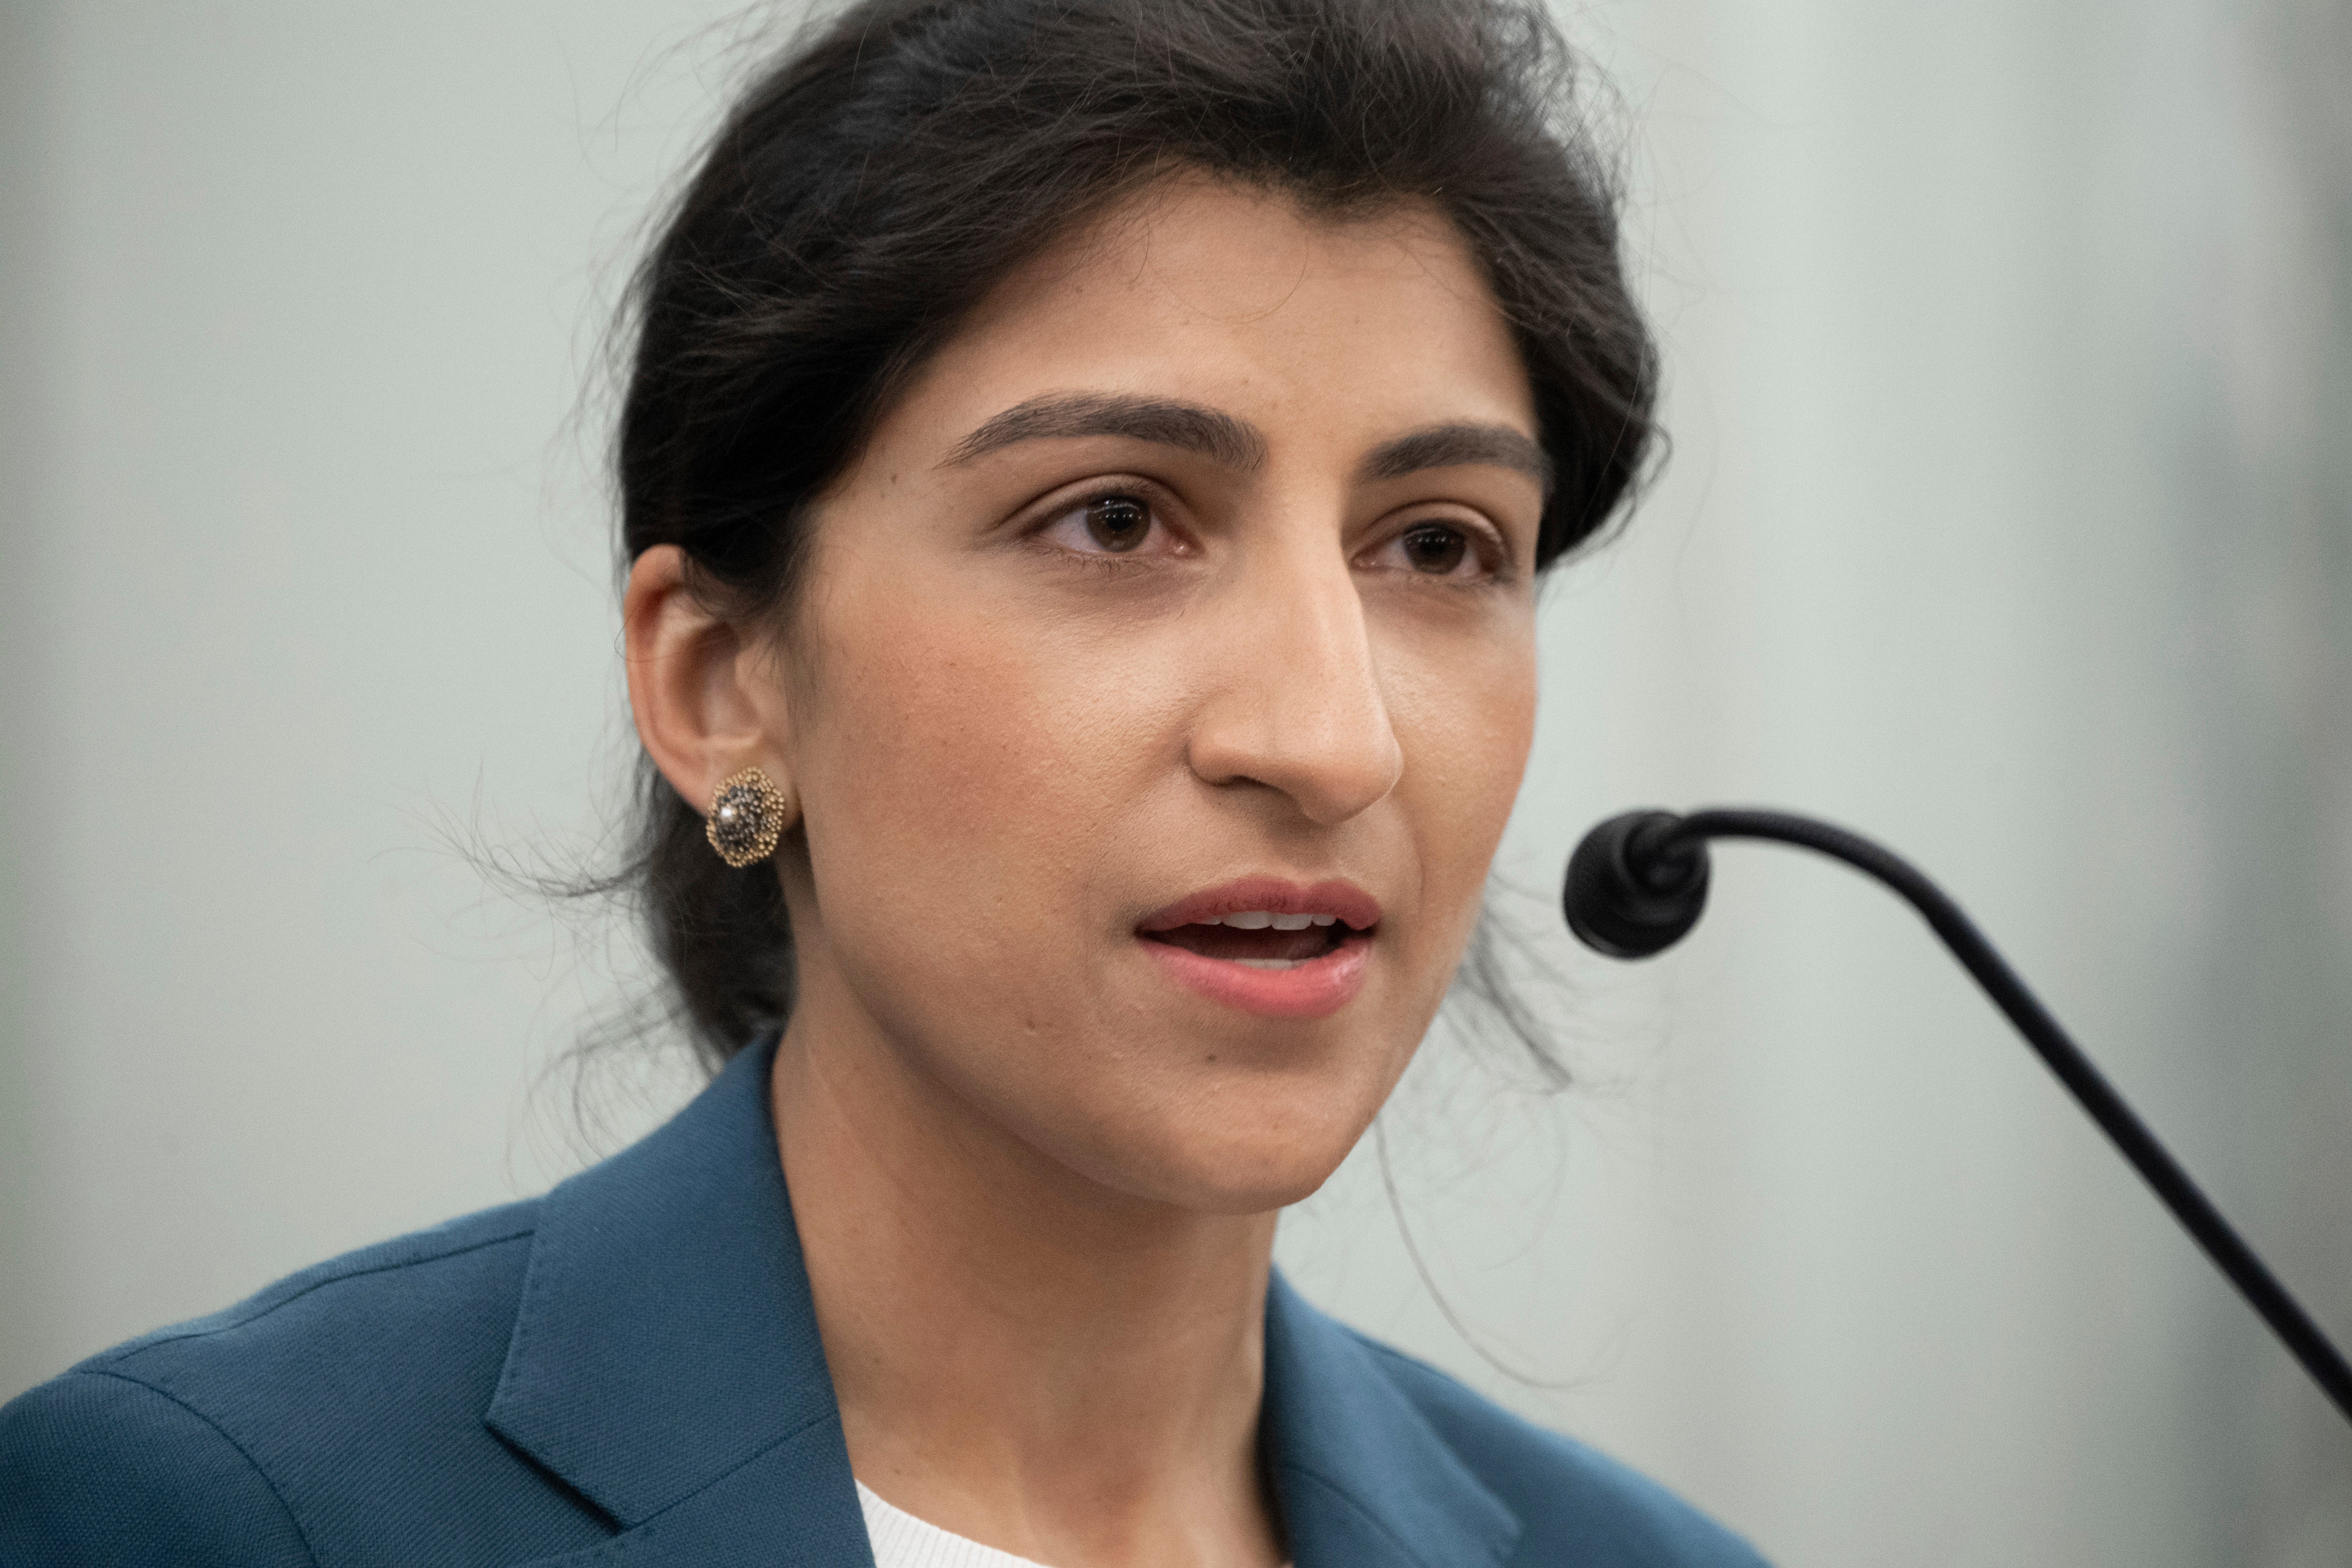 Amazon claims the new head of the Federal Trade Commission, Lina Khan, cannot fairly regulate